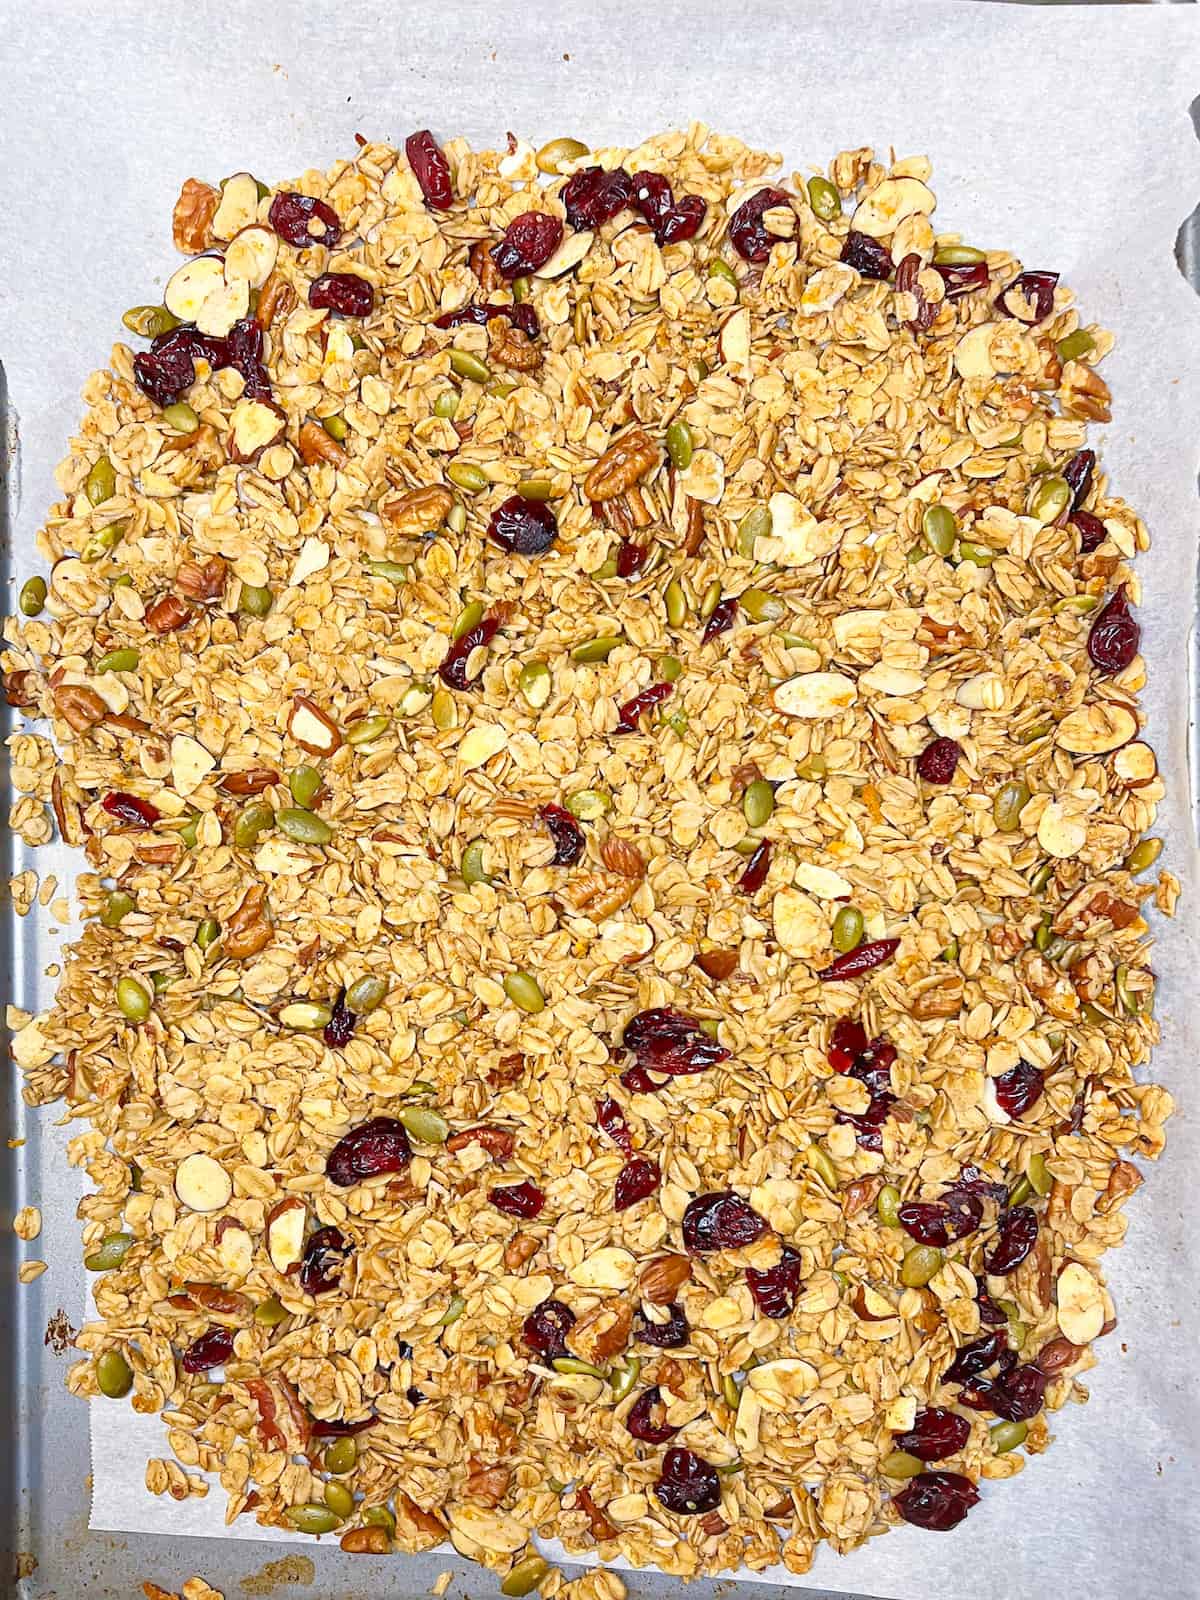 Orange granola with pecans and cranberries on a baking sheet